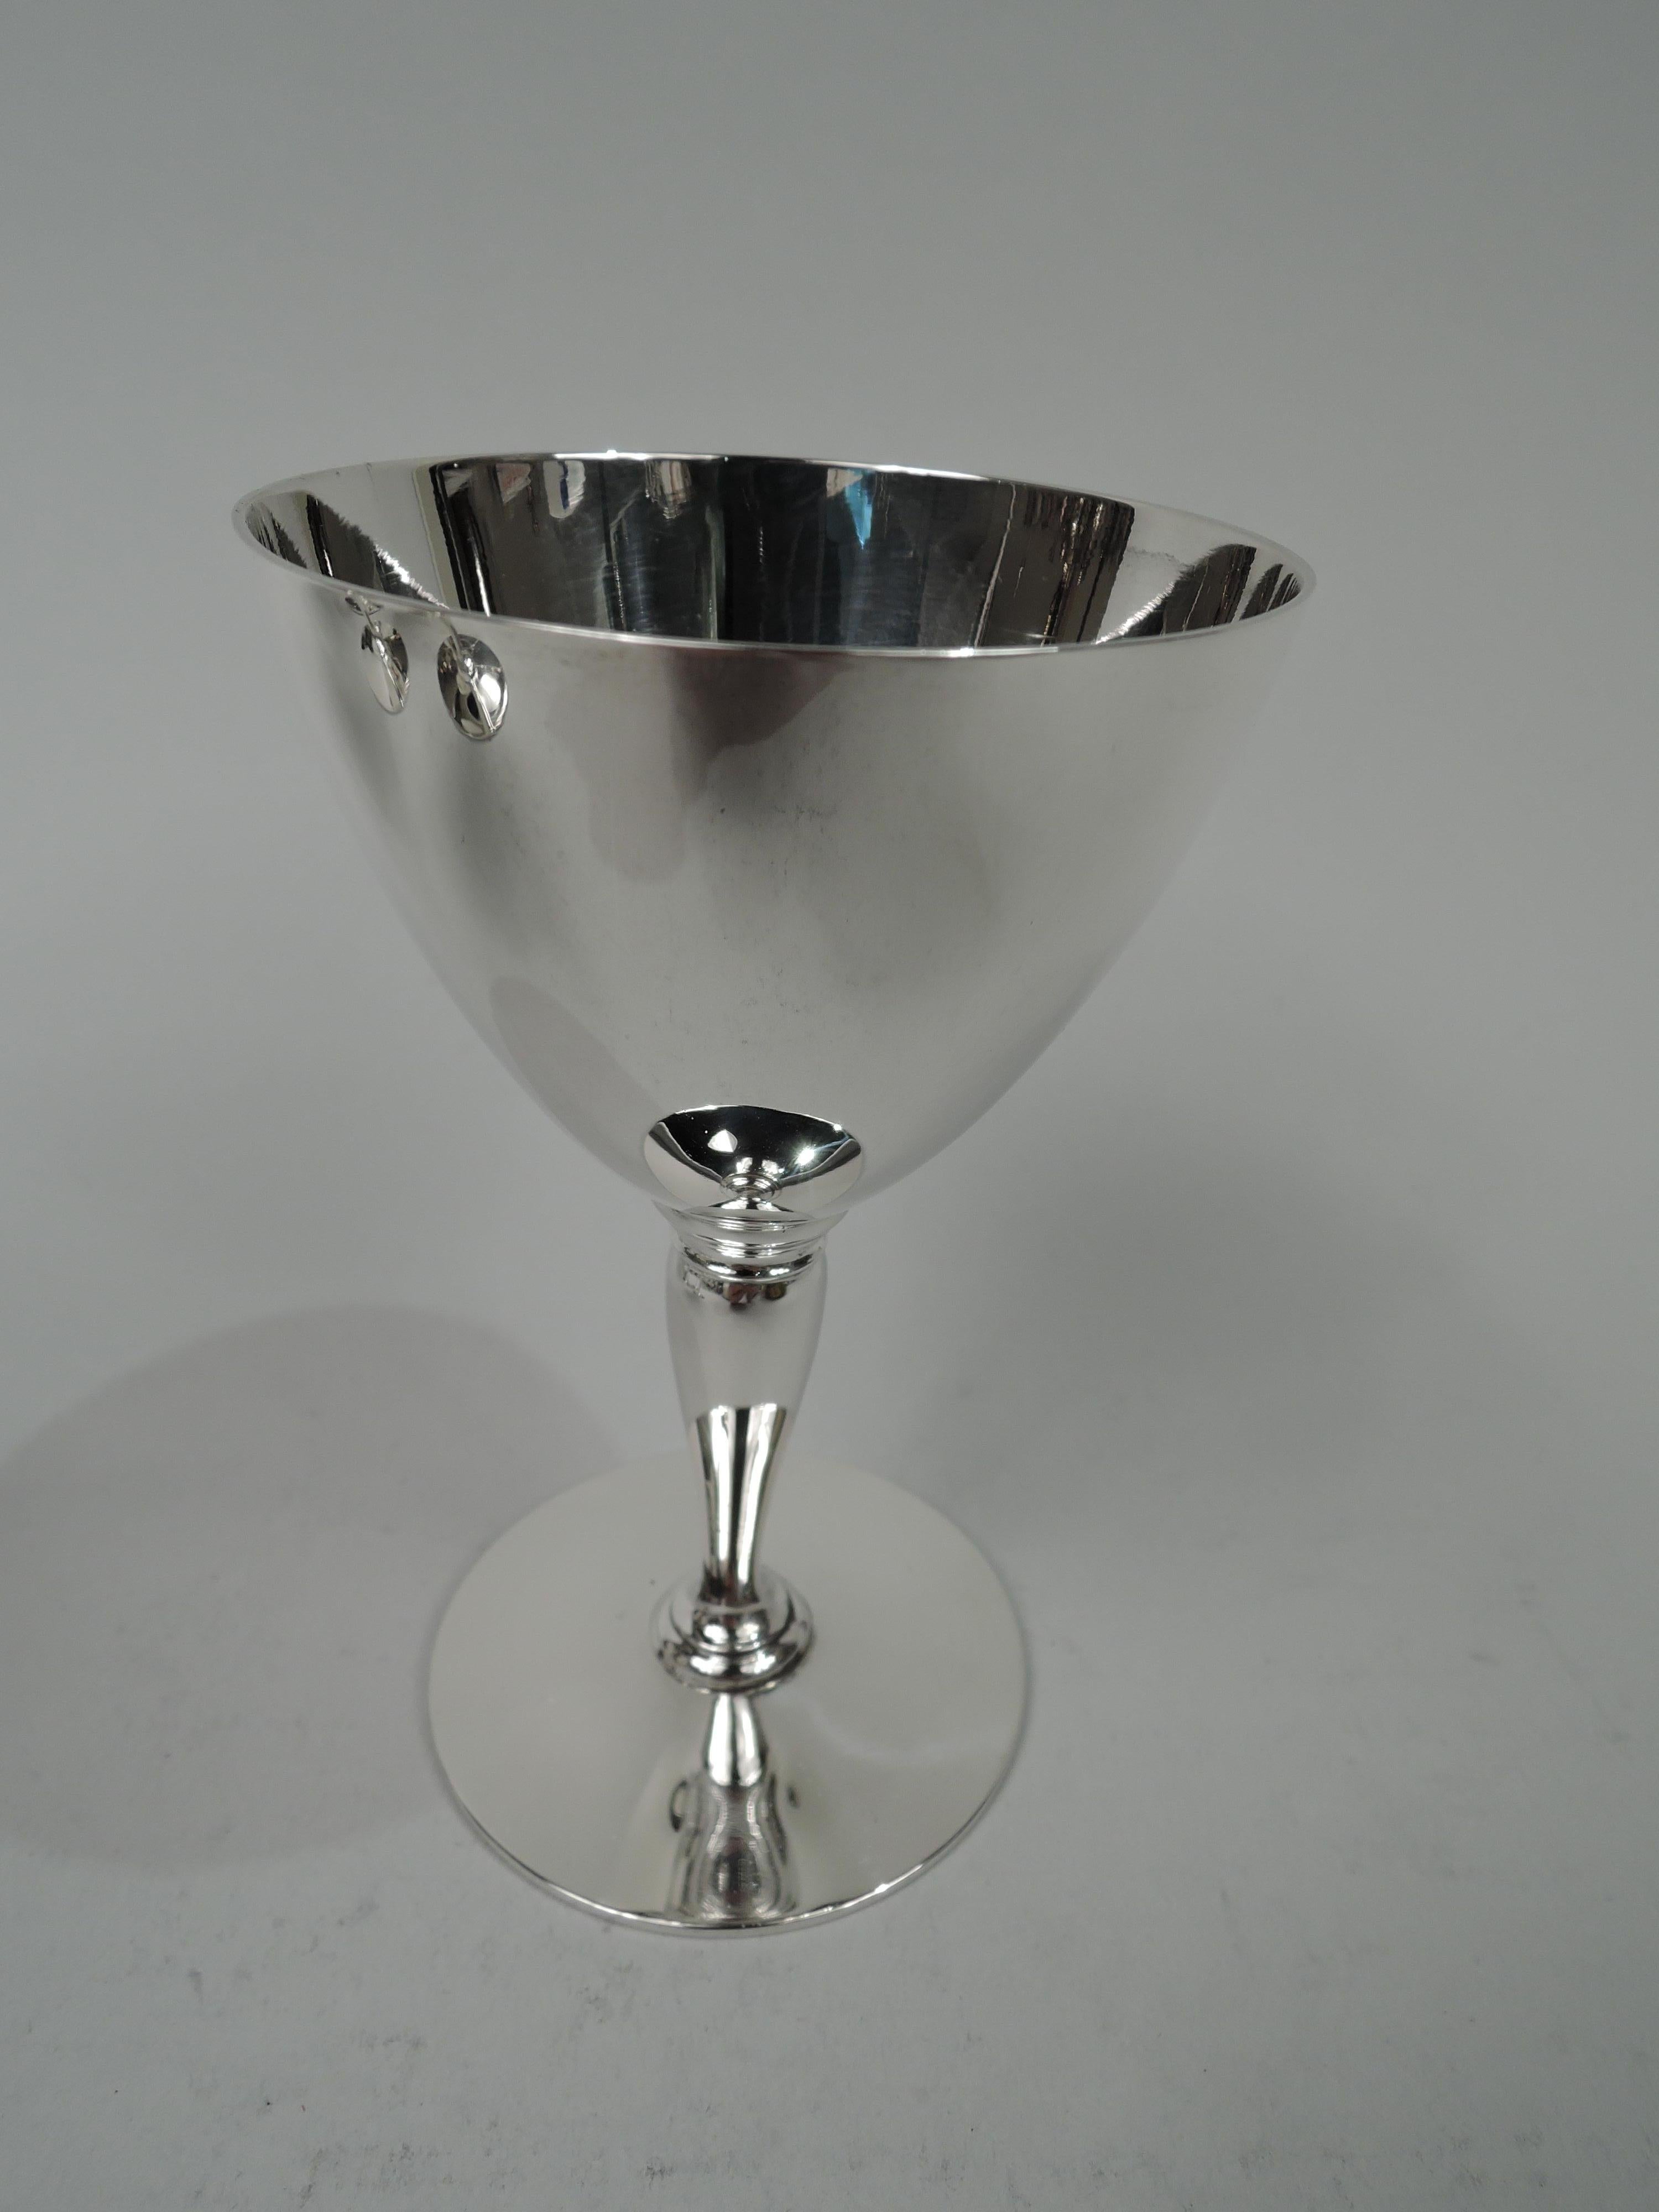 Set of 6 Art Deco sterling silver cocktail cups. Made by Tiffany & Co. in New York, ca 1915. Each: Cone on baluster mounted to circle. Spare and functional. Nice balance for swishing the booze around. Fully marked including maker’s stamp, pattern